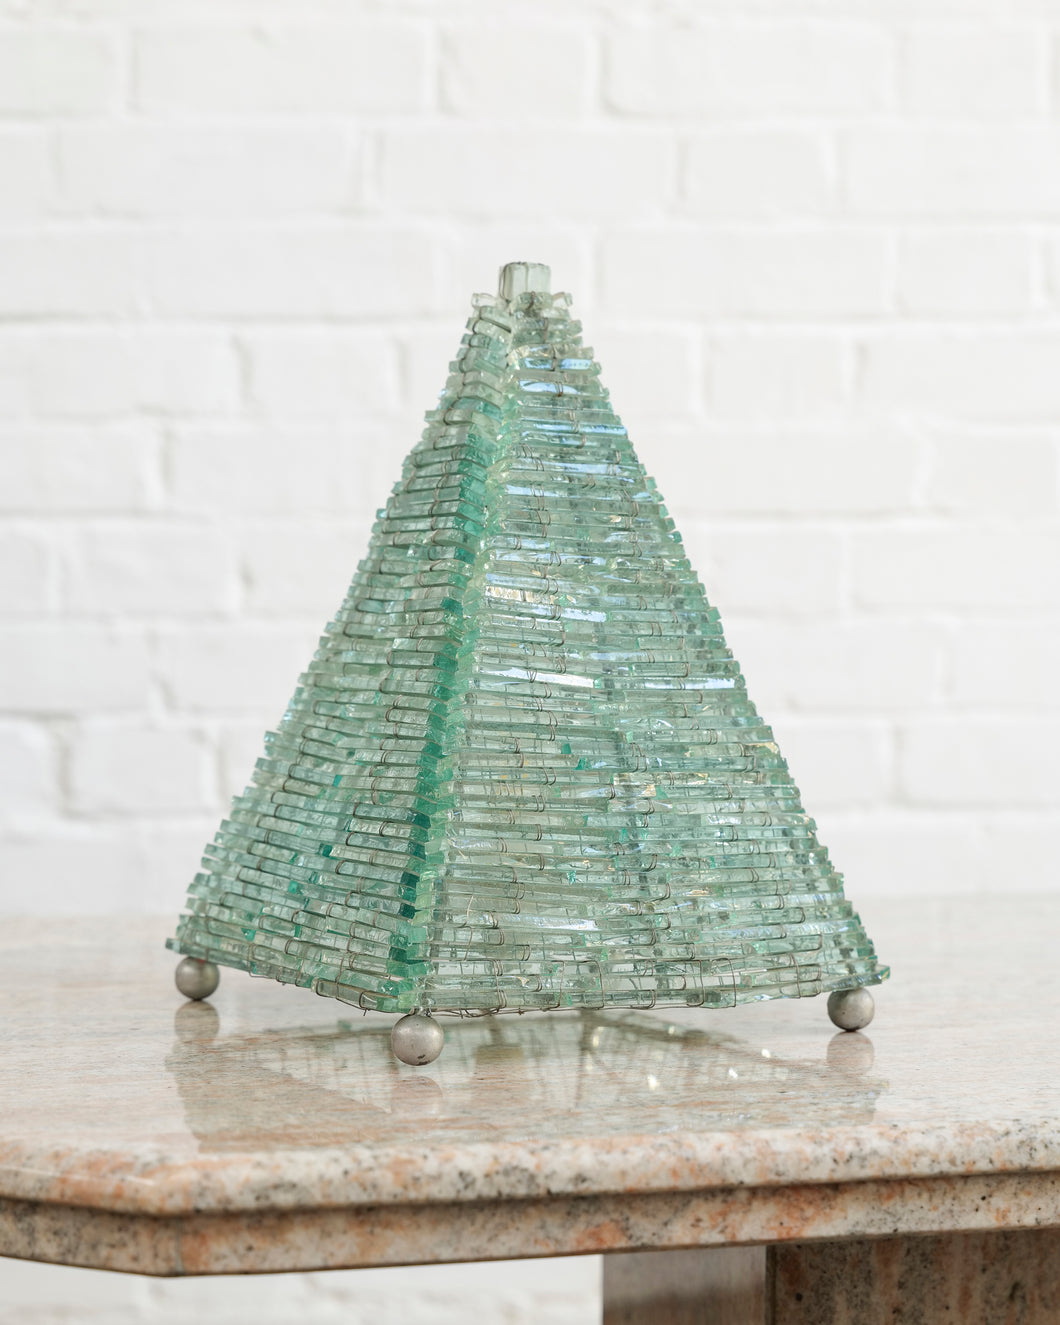 FRENCH GLASS PYRAMID TABLE LAMP